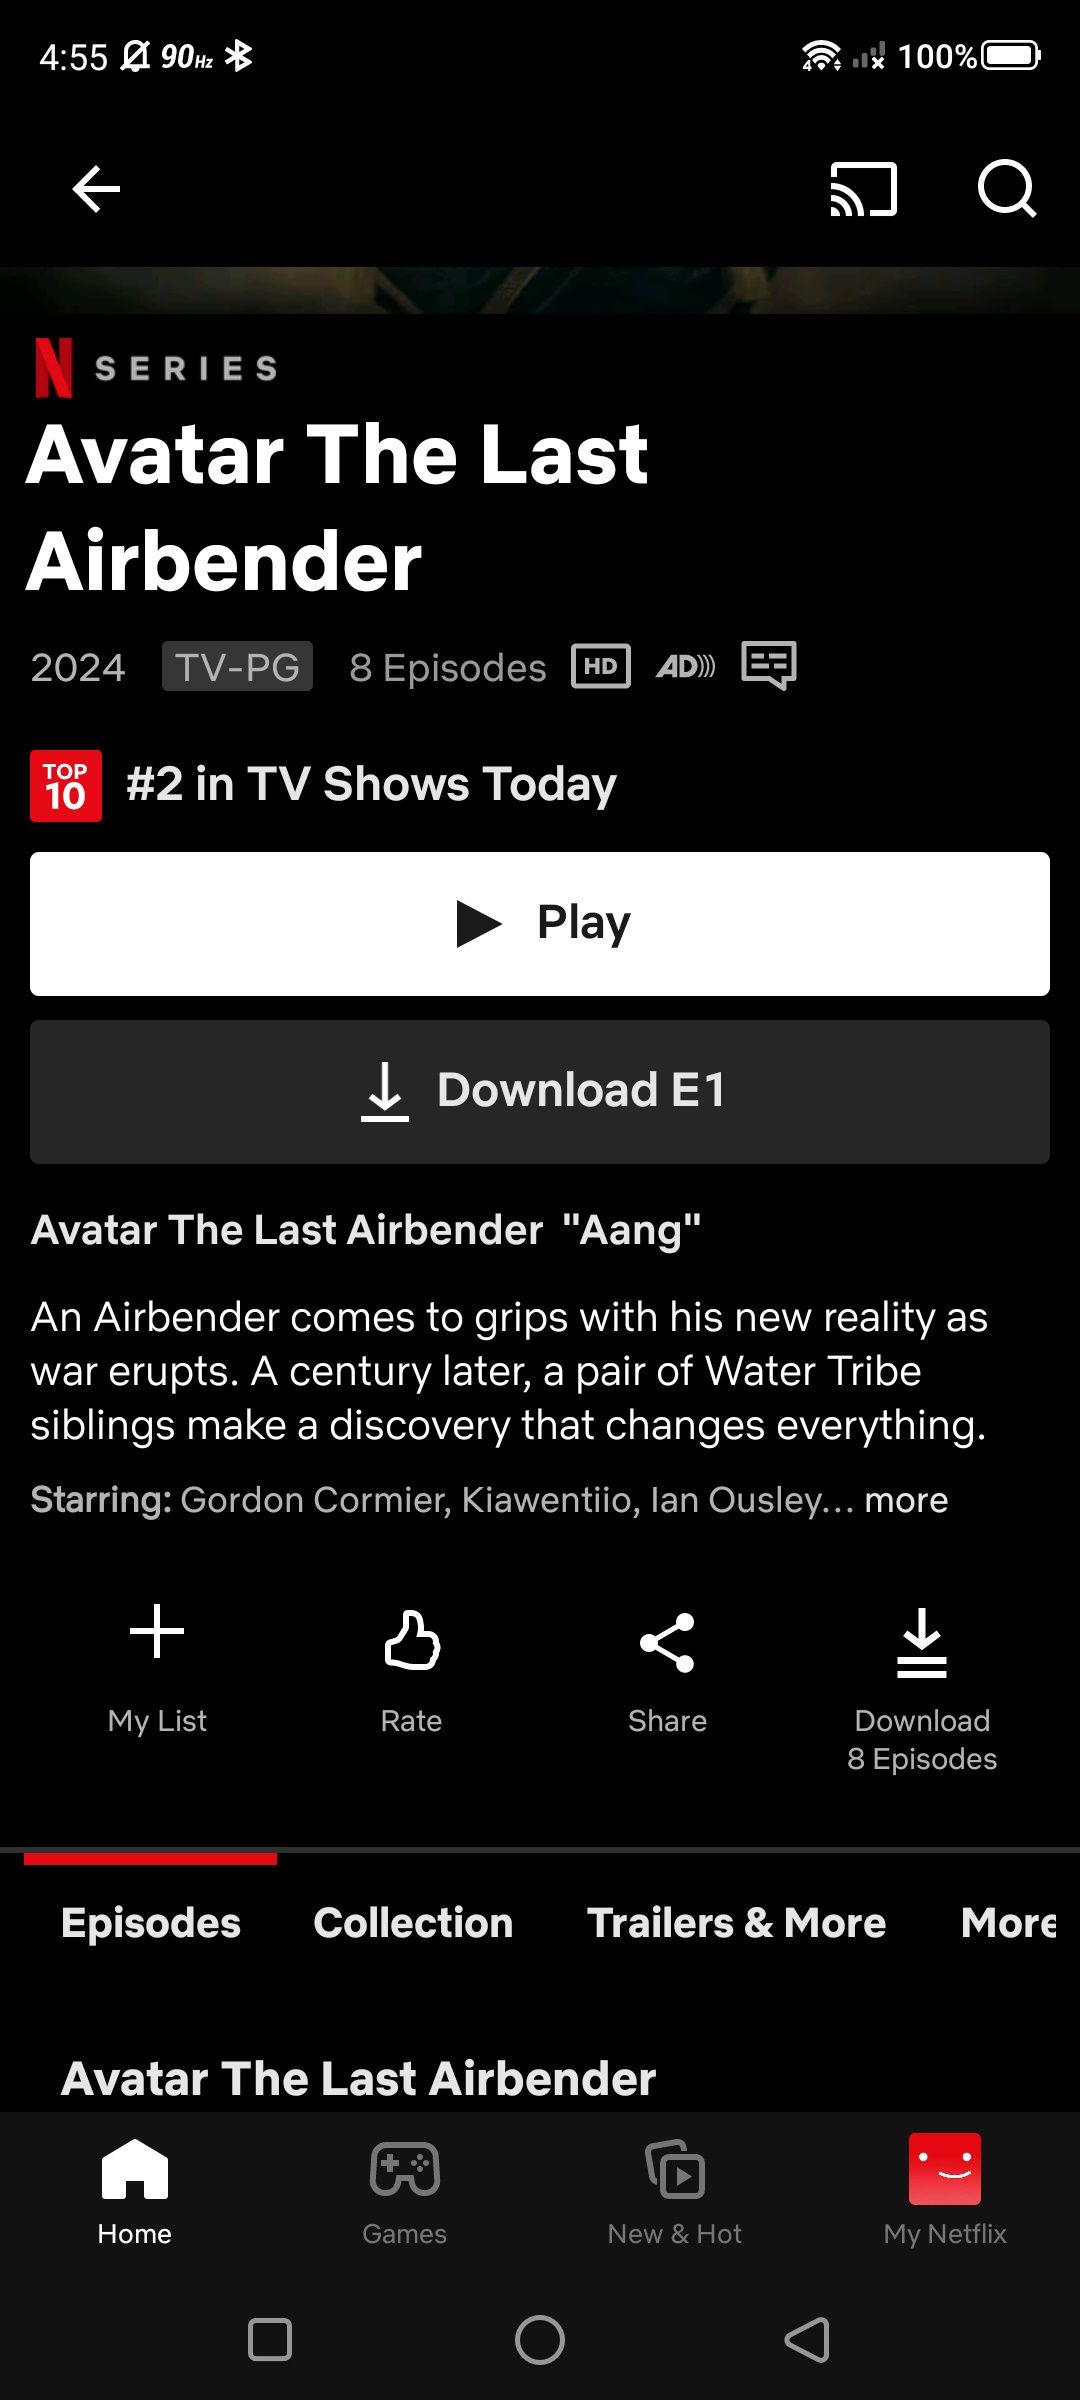 play button on the netflix mobile app for avatar the last airbender